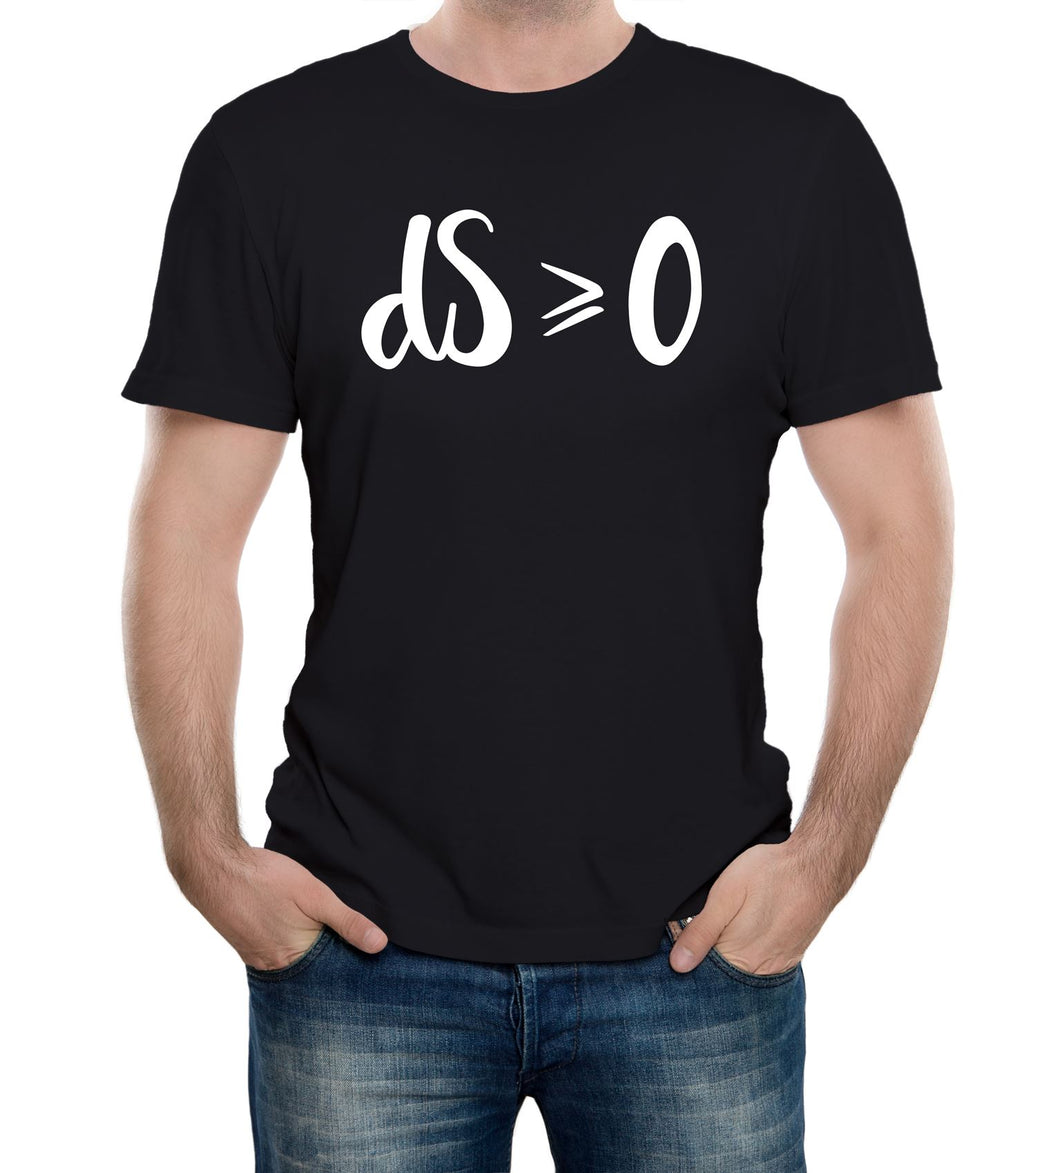 Second Law of Thermodynamics Mens T-Shirt